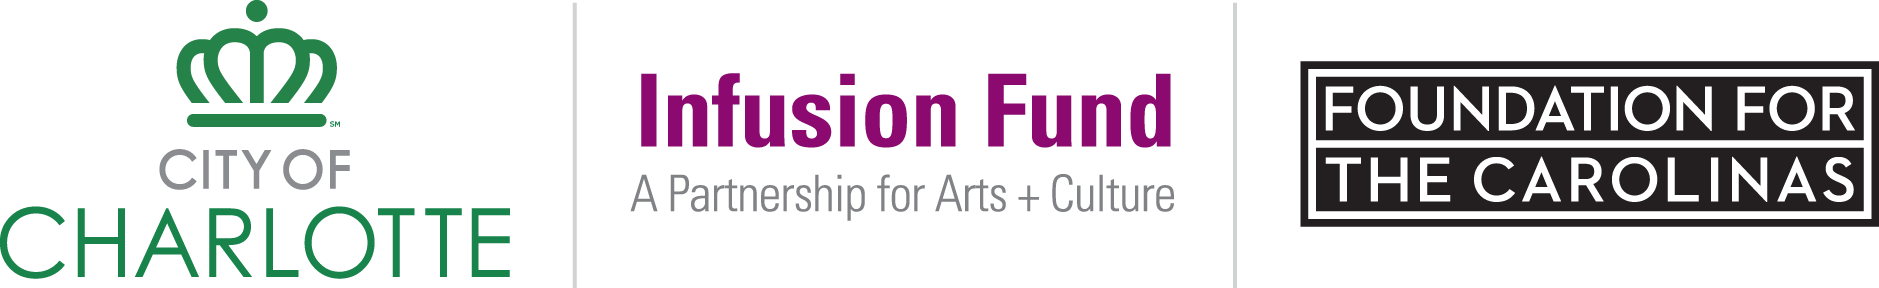 Infusion Fund logo.